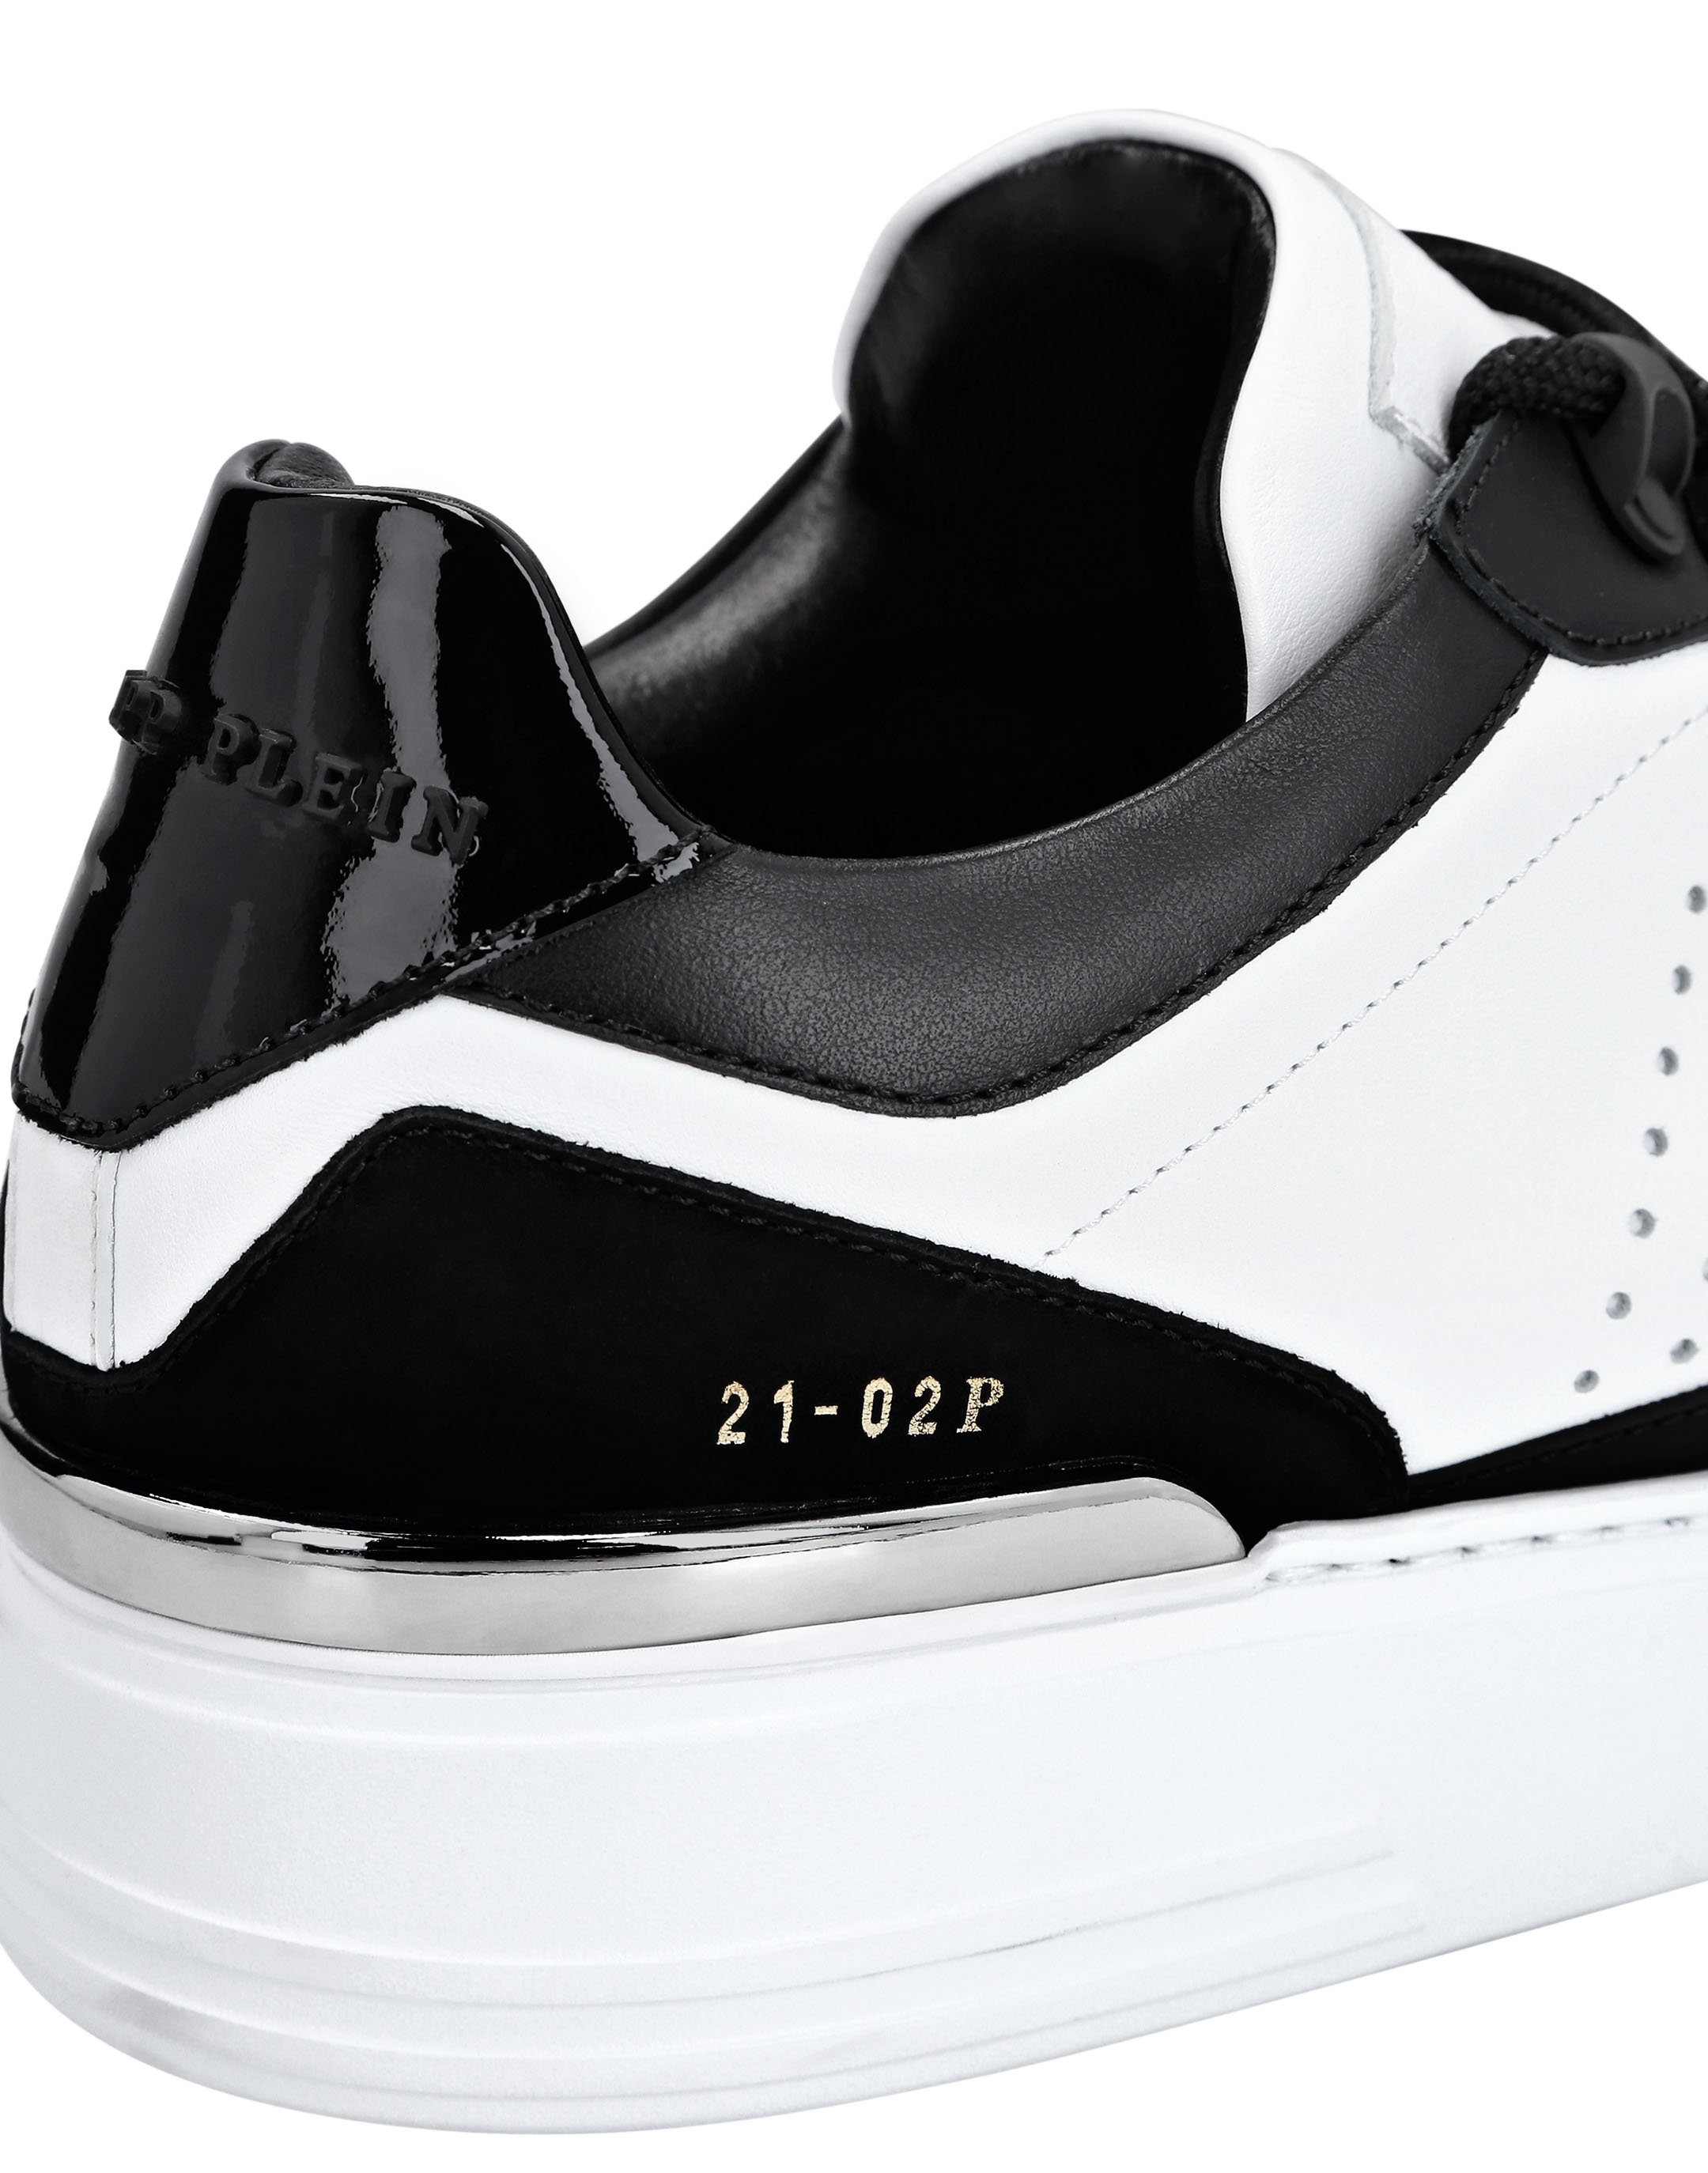 Lo-Top Sneakers mix leathers G.O.A.T. TM | Philipp Plein Outlet